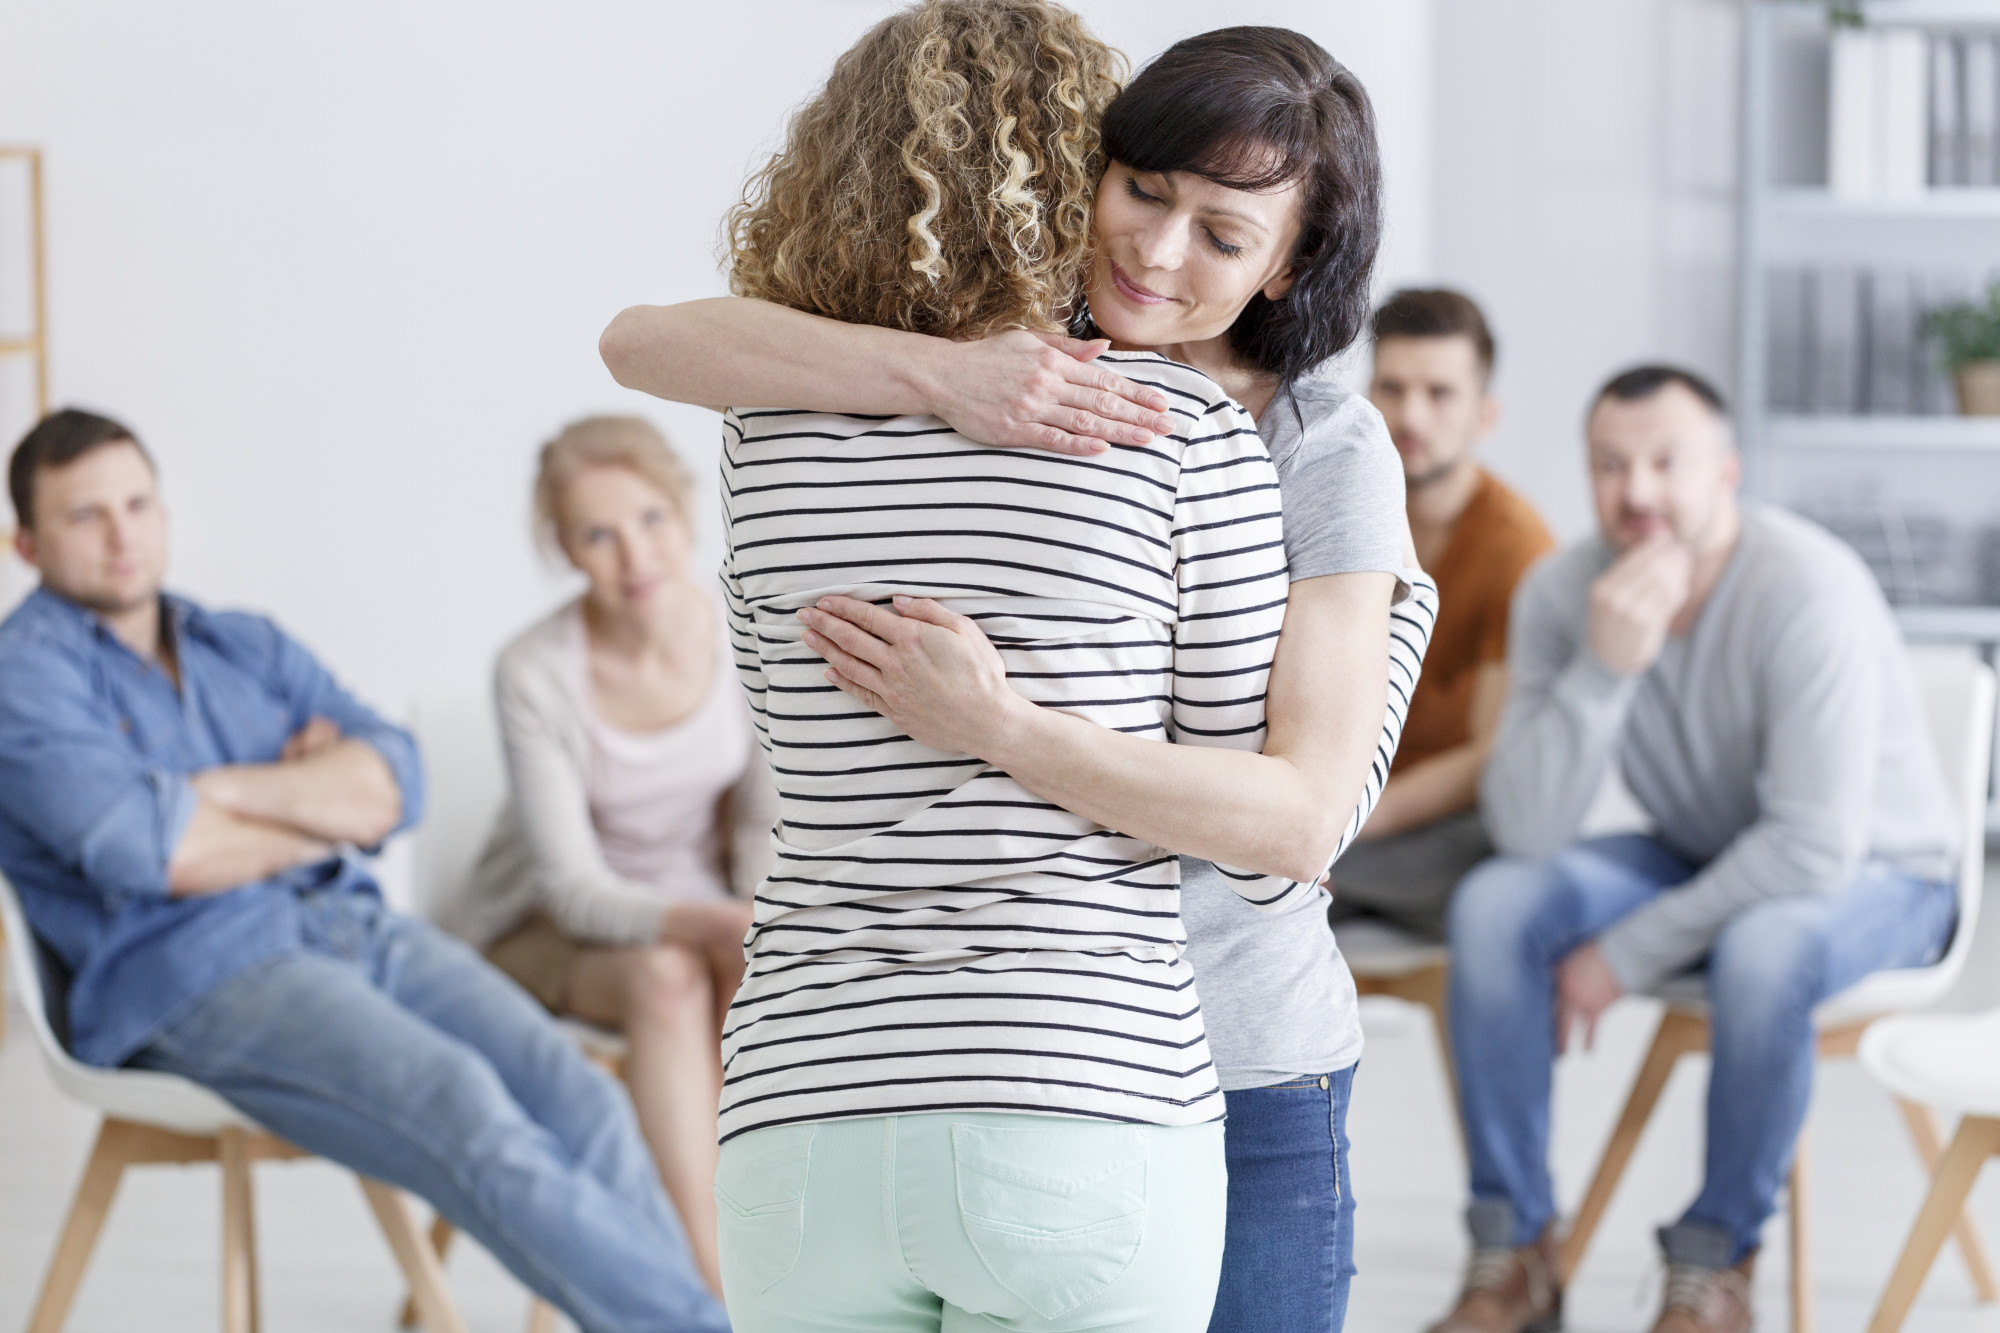 What To Expect From an Intensive Outpatient Program